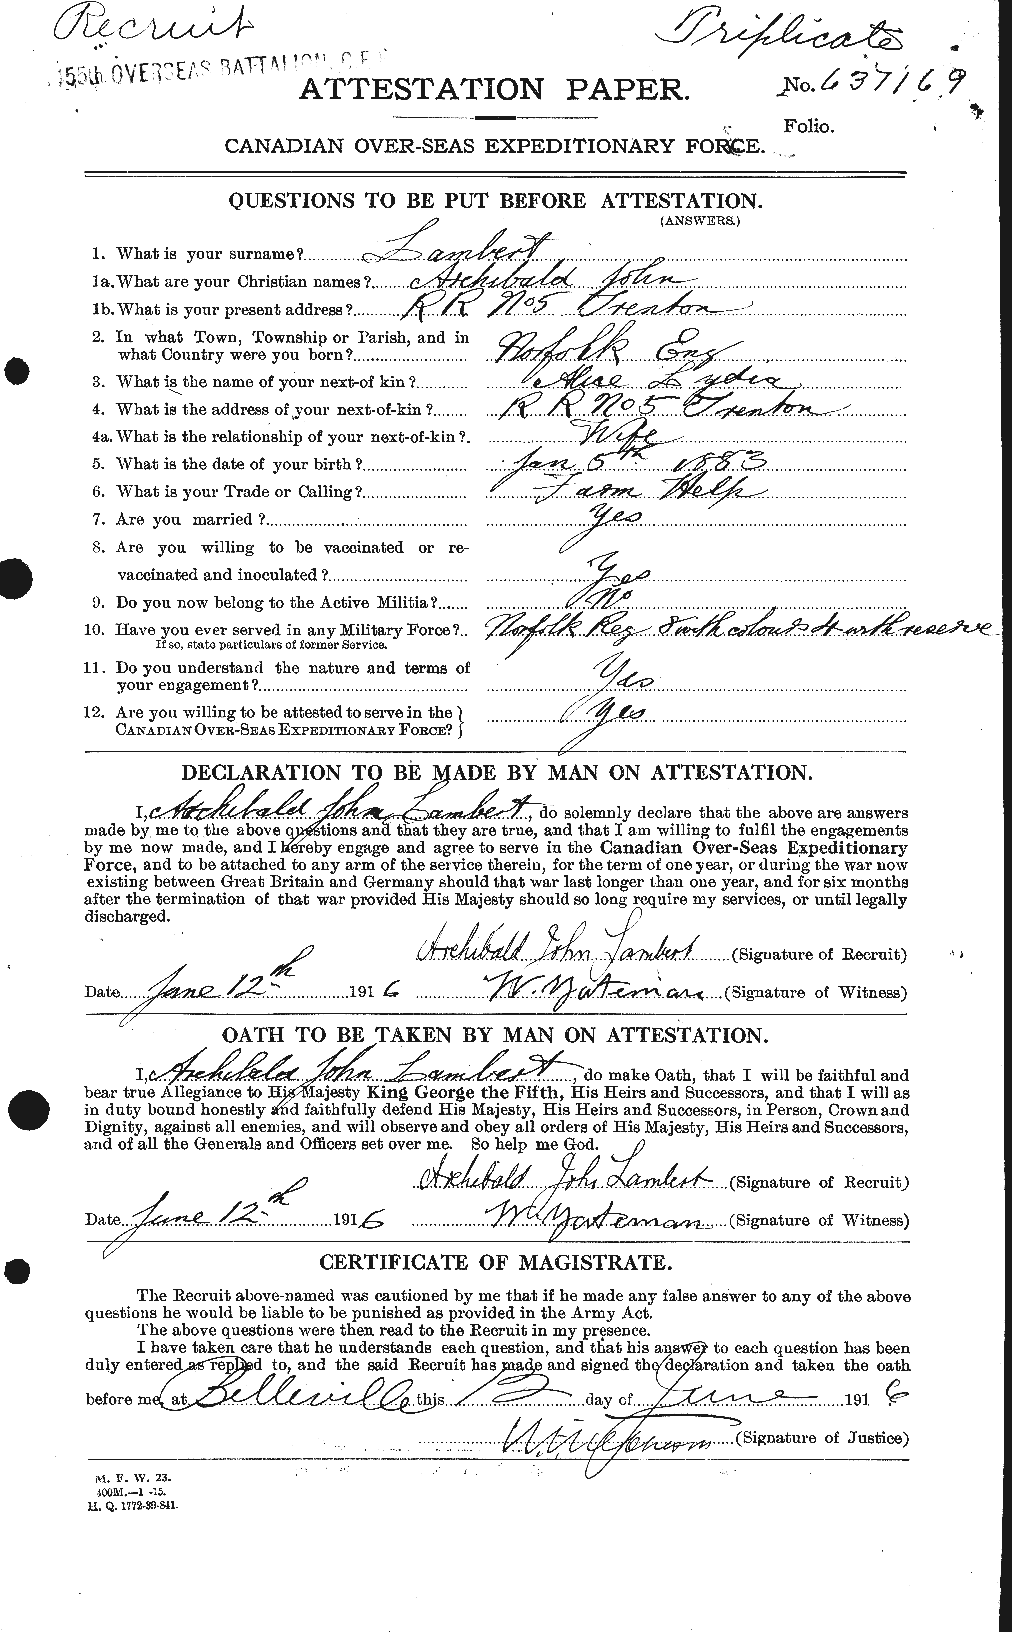 Personnel Records of the First World War - CEF 442976a